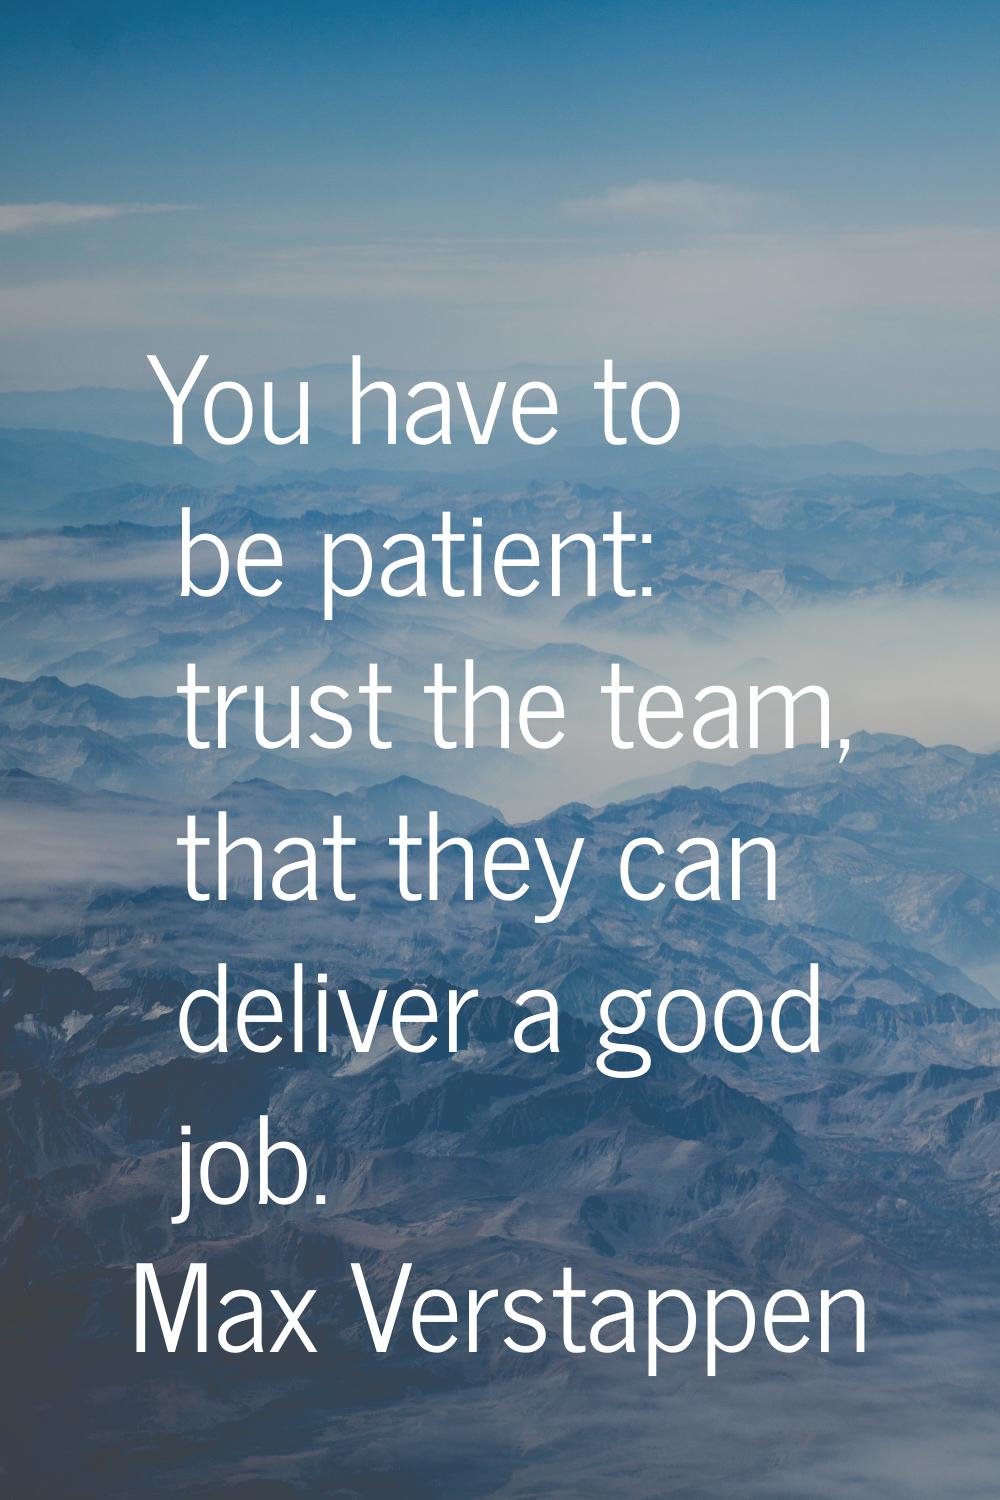 You have to be patient: trust the team, that they can deliver a good job.